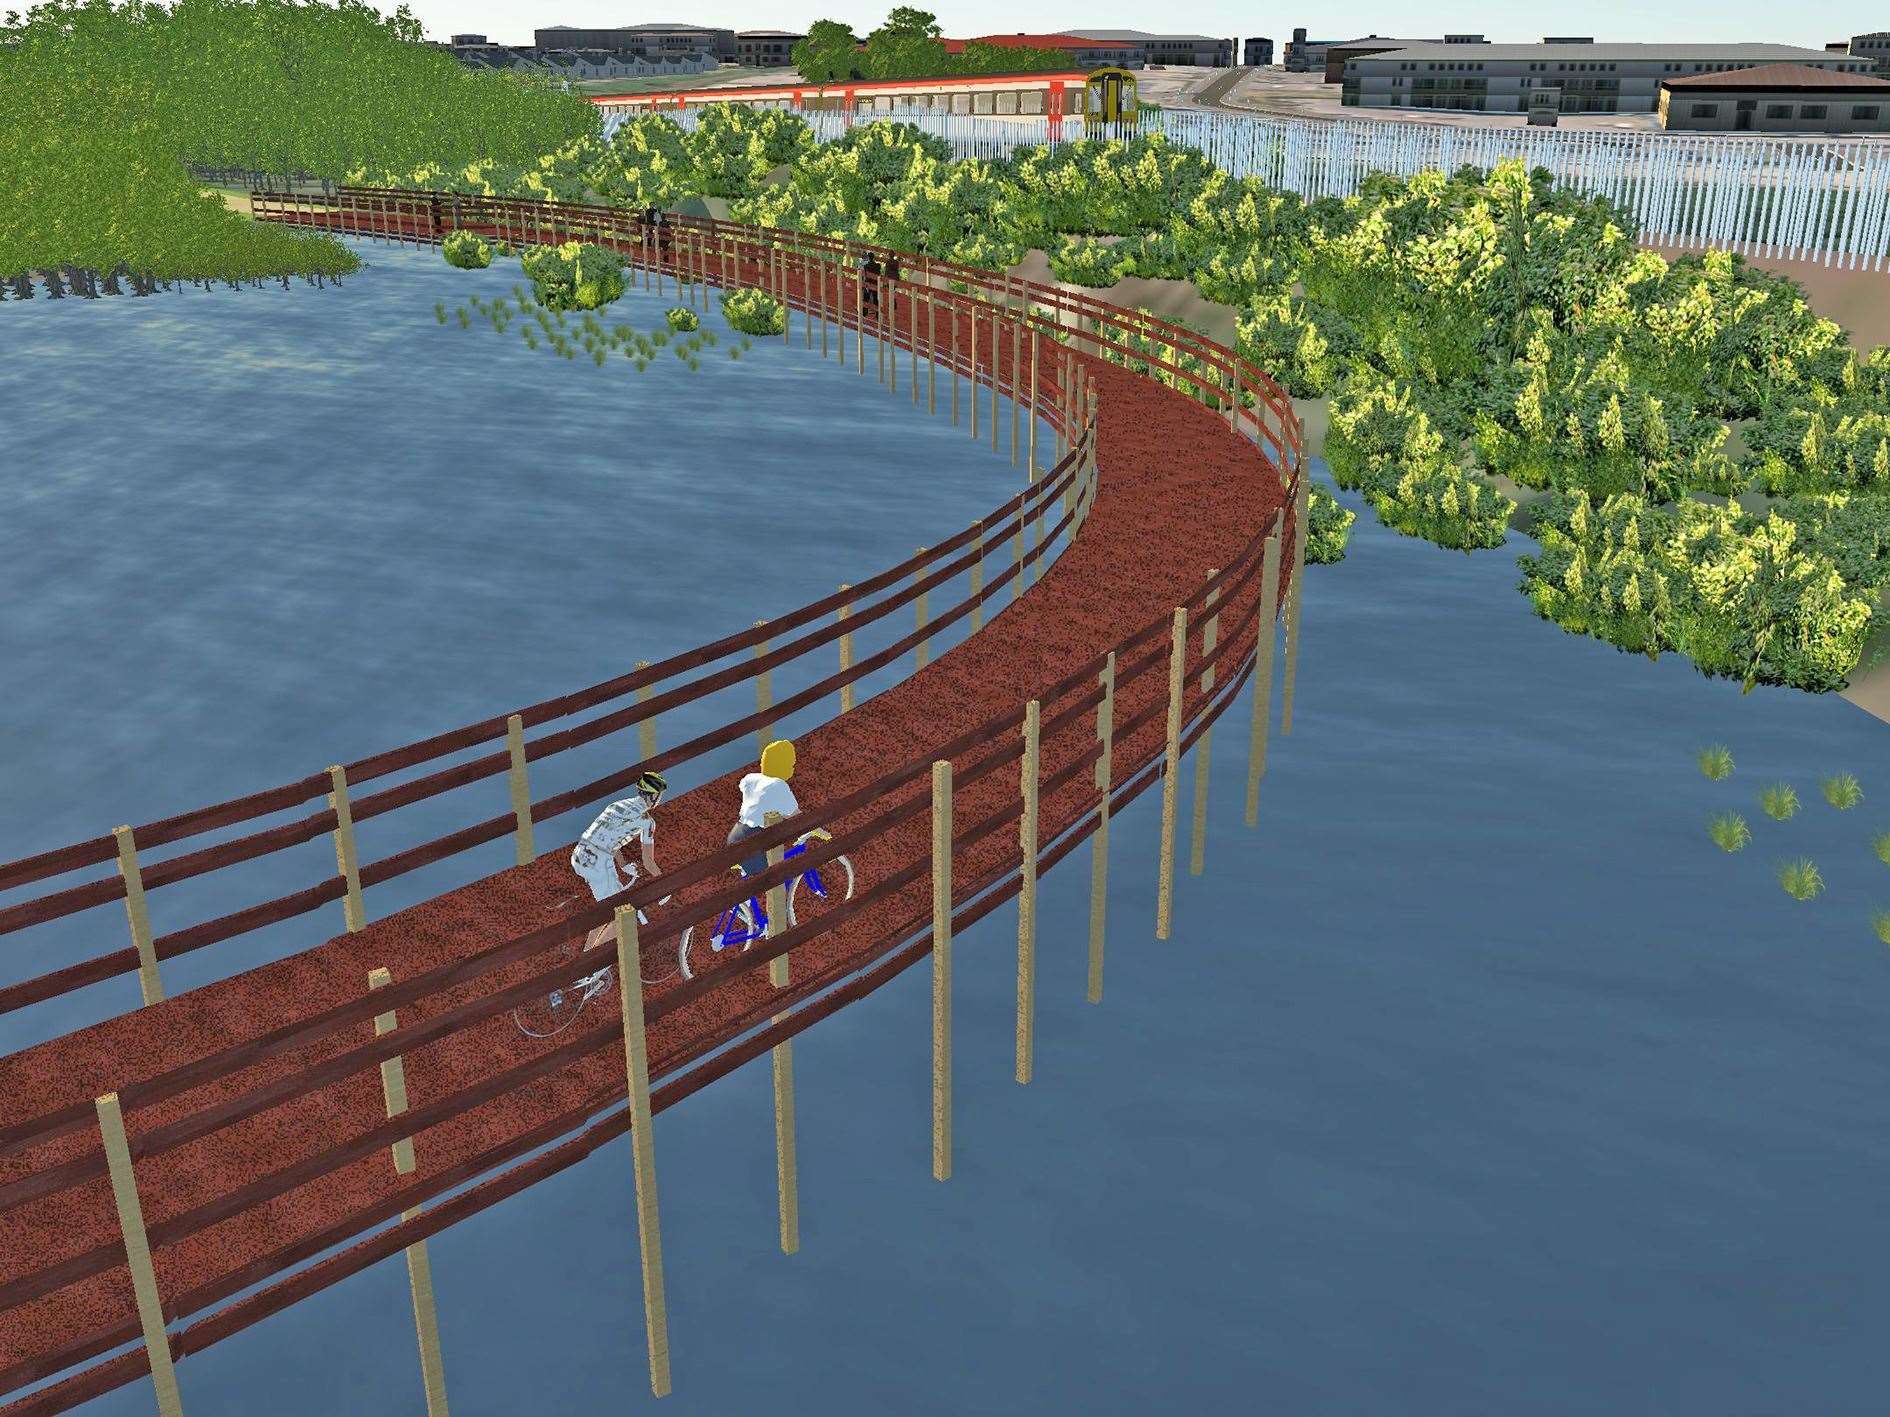 A public consultation has been launched on the Merkinch Local Nature Reserve Boardwalk project.